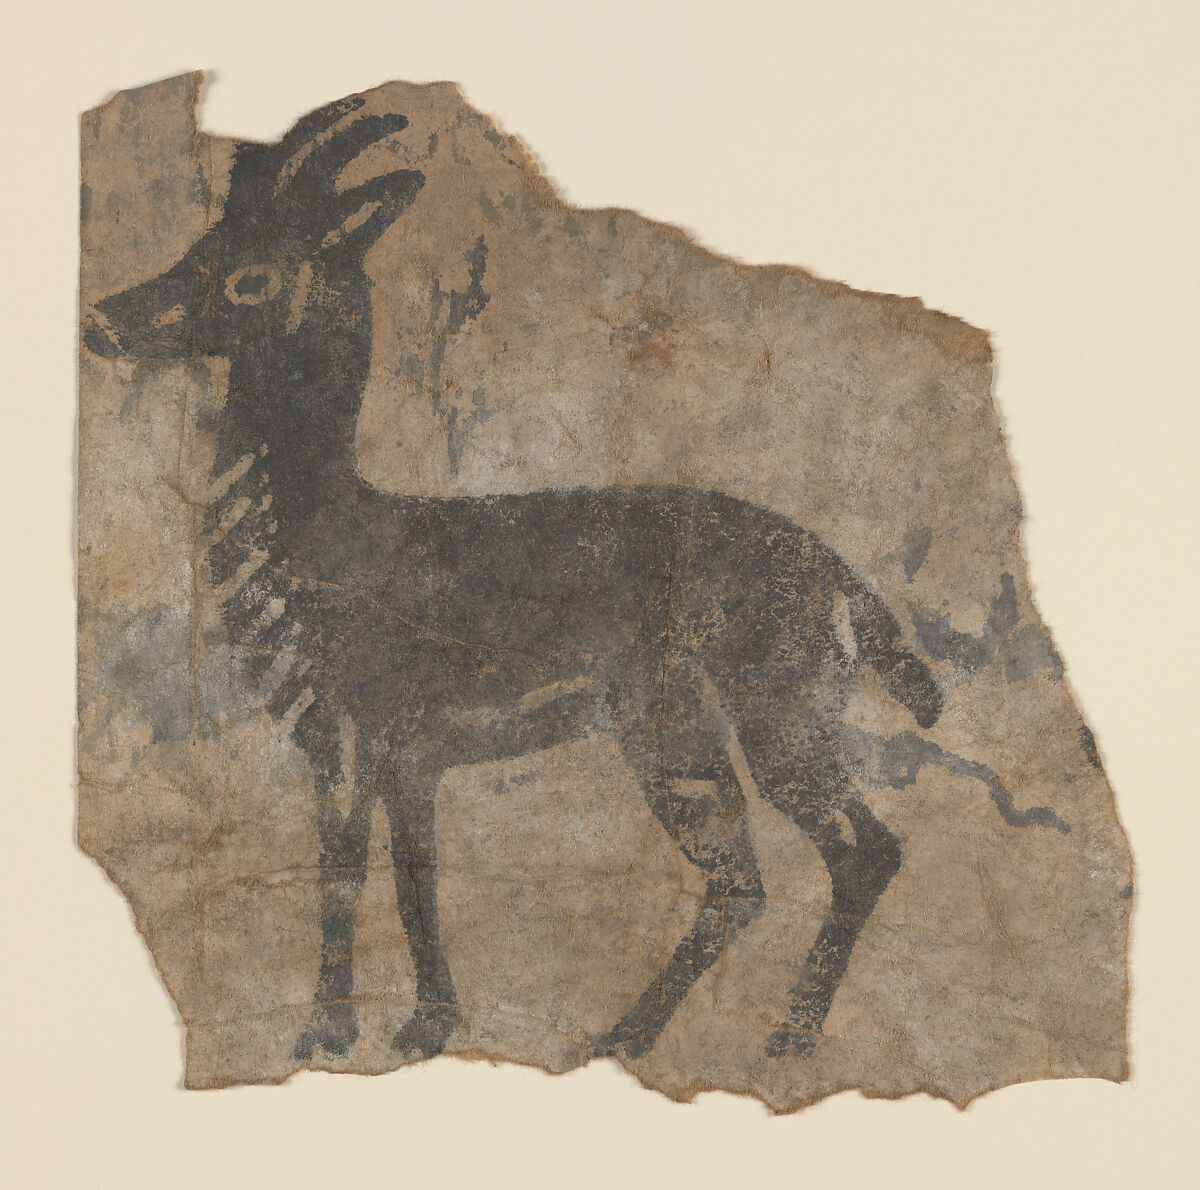 Ibex or Gazelle, Block Print, Ink and white pigment on paper 